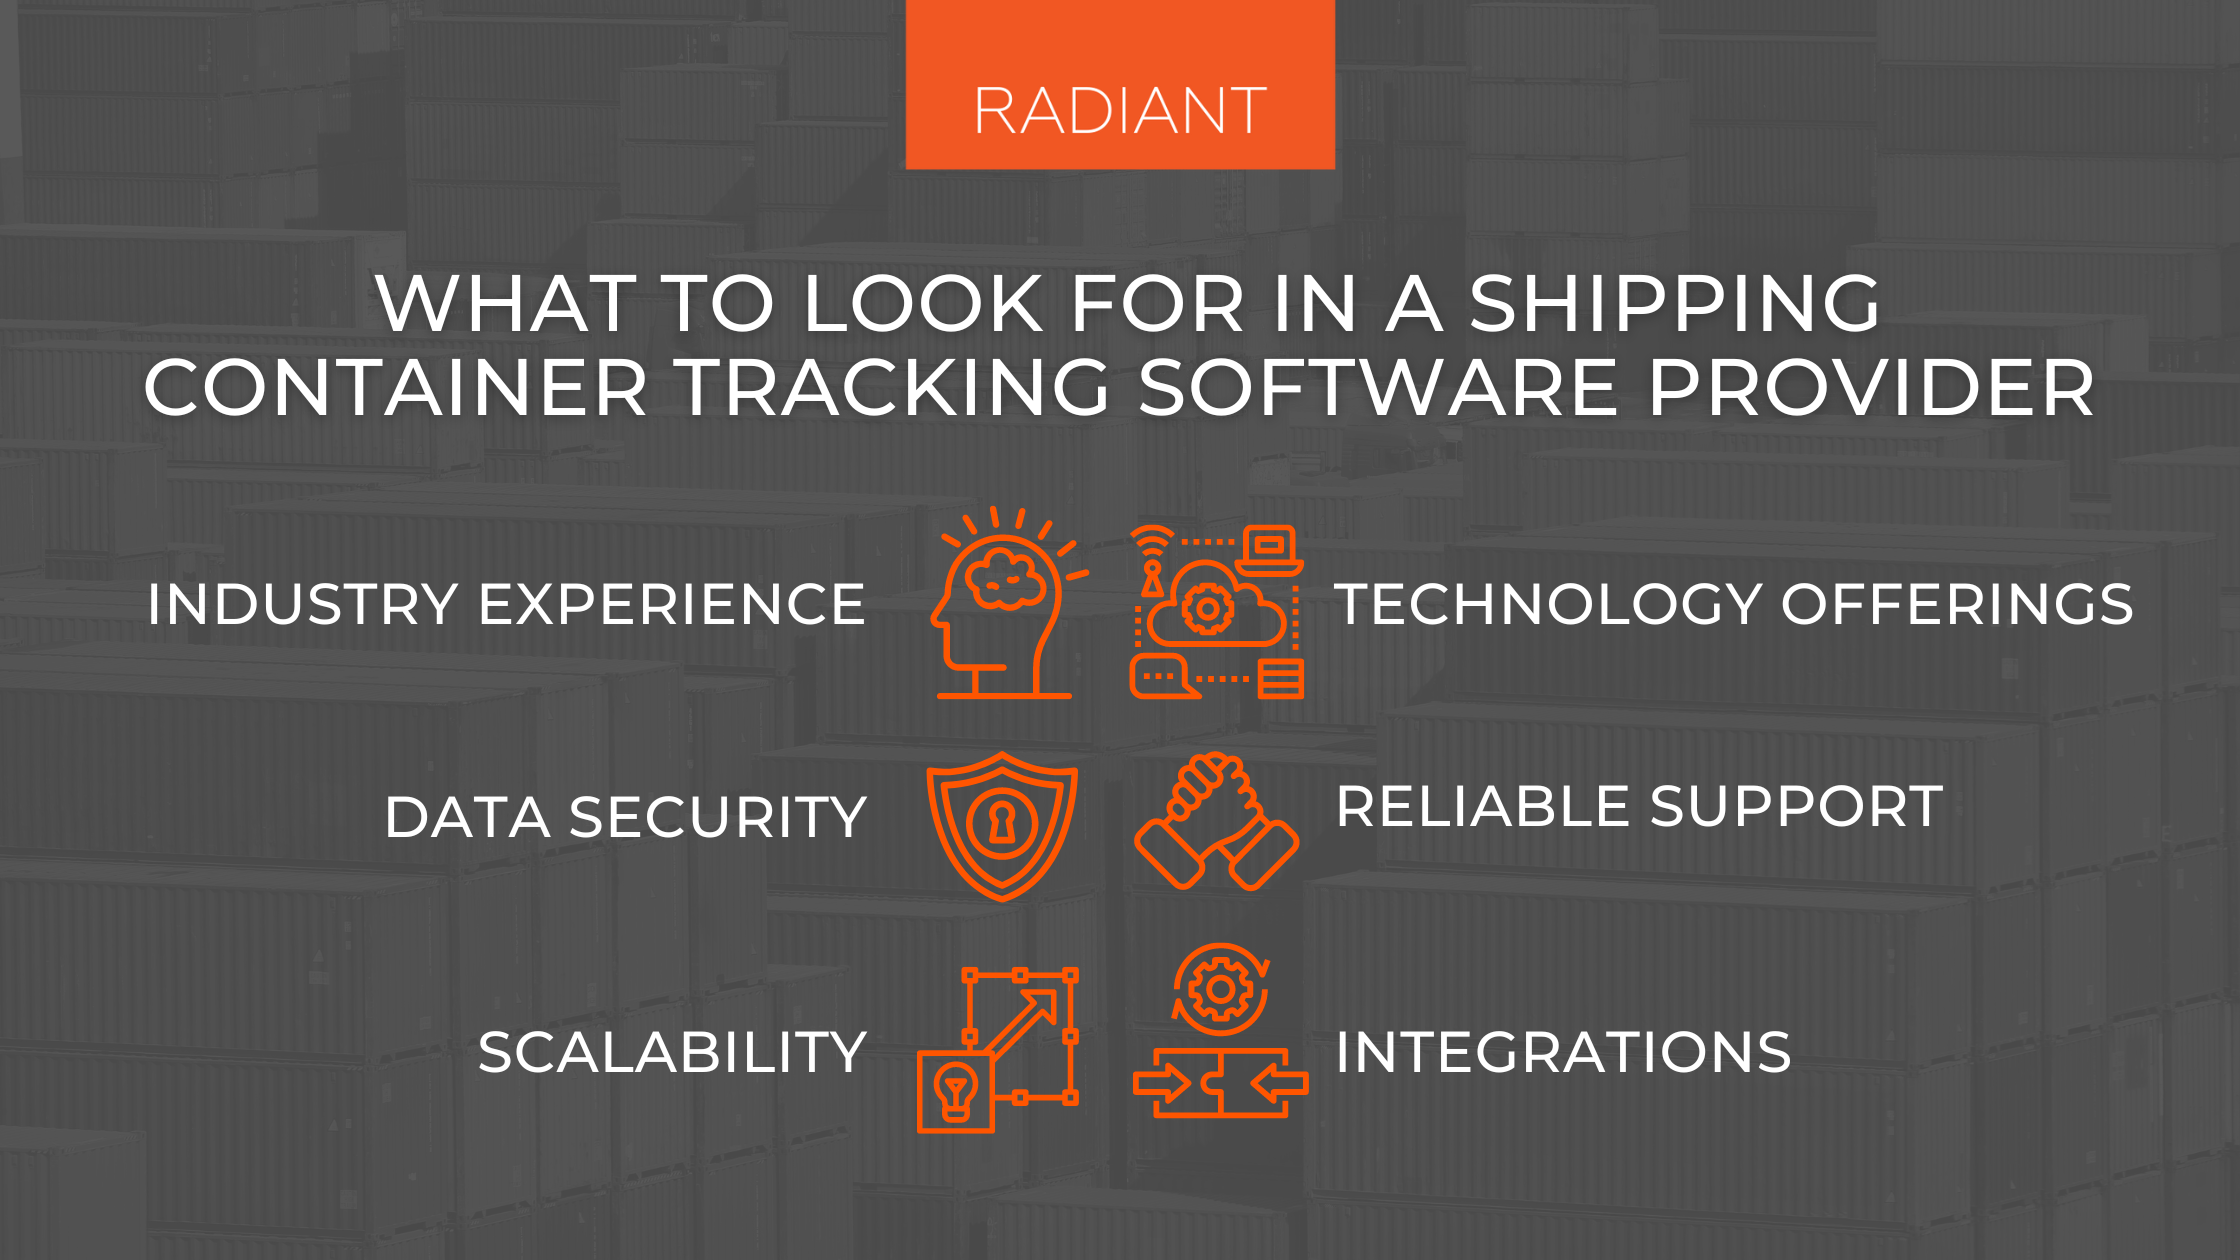 Shipping Container Tracking Solution - Container Tracking Software - Container Management Software - Container Monitoring Software - Best Container Tracking Software - Ocean Container Tracking Software - Container Tracking Platform - Shipping Container Tracking - Shipping Container Tracking Software - Shipping Container Tracker - Shipping Container Monitoring - Shipping Container Software